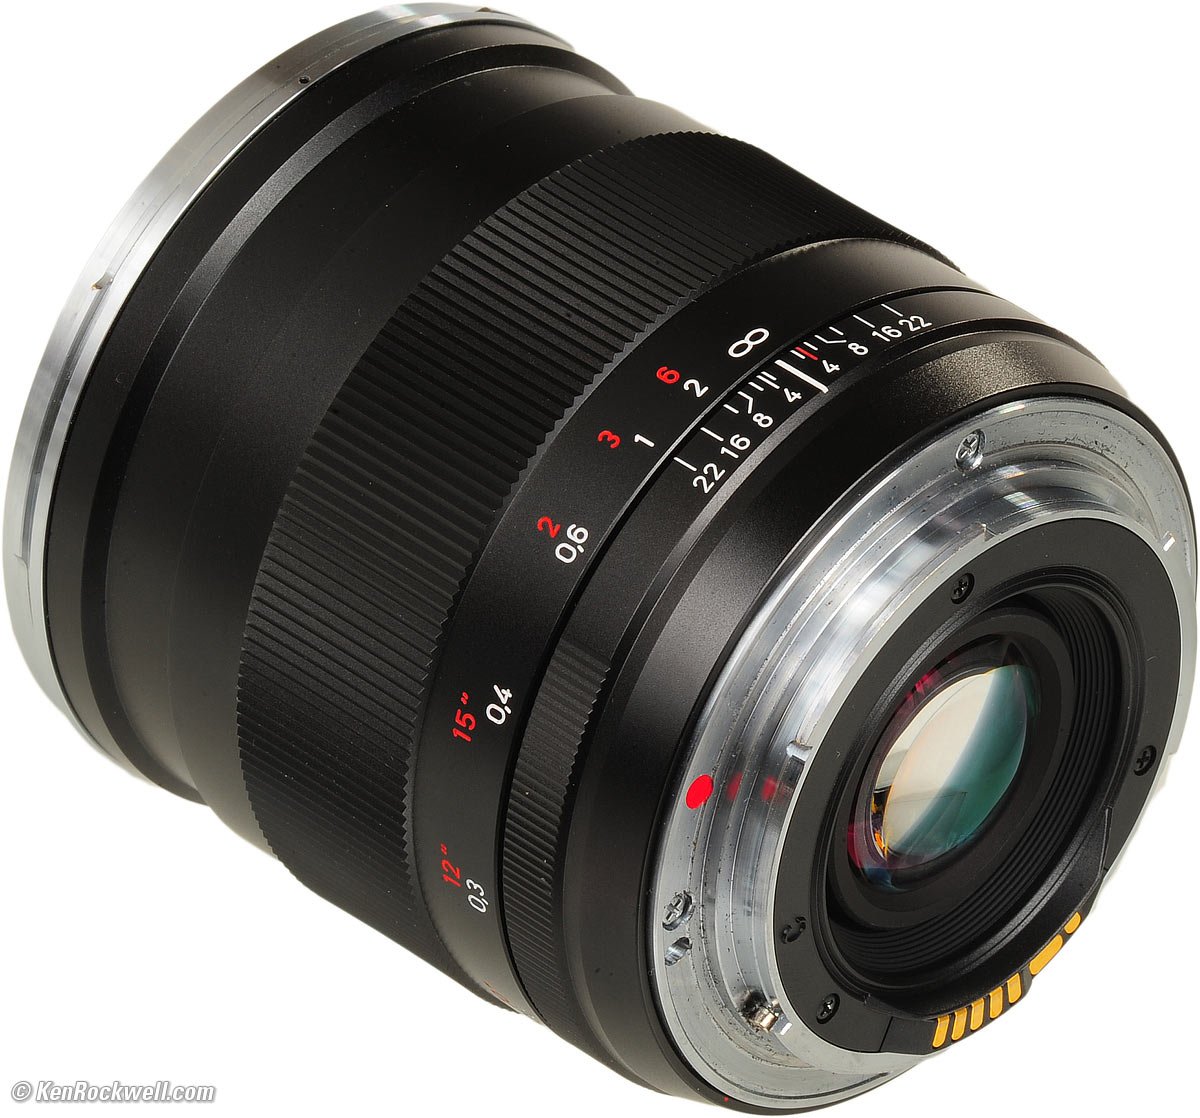 Zeiss 25mm f/2 Distagon Review